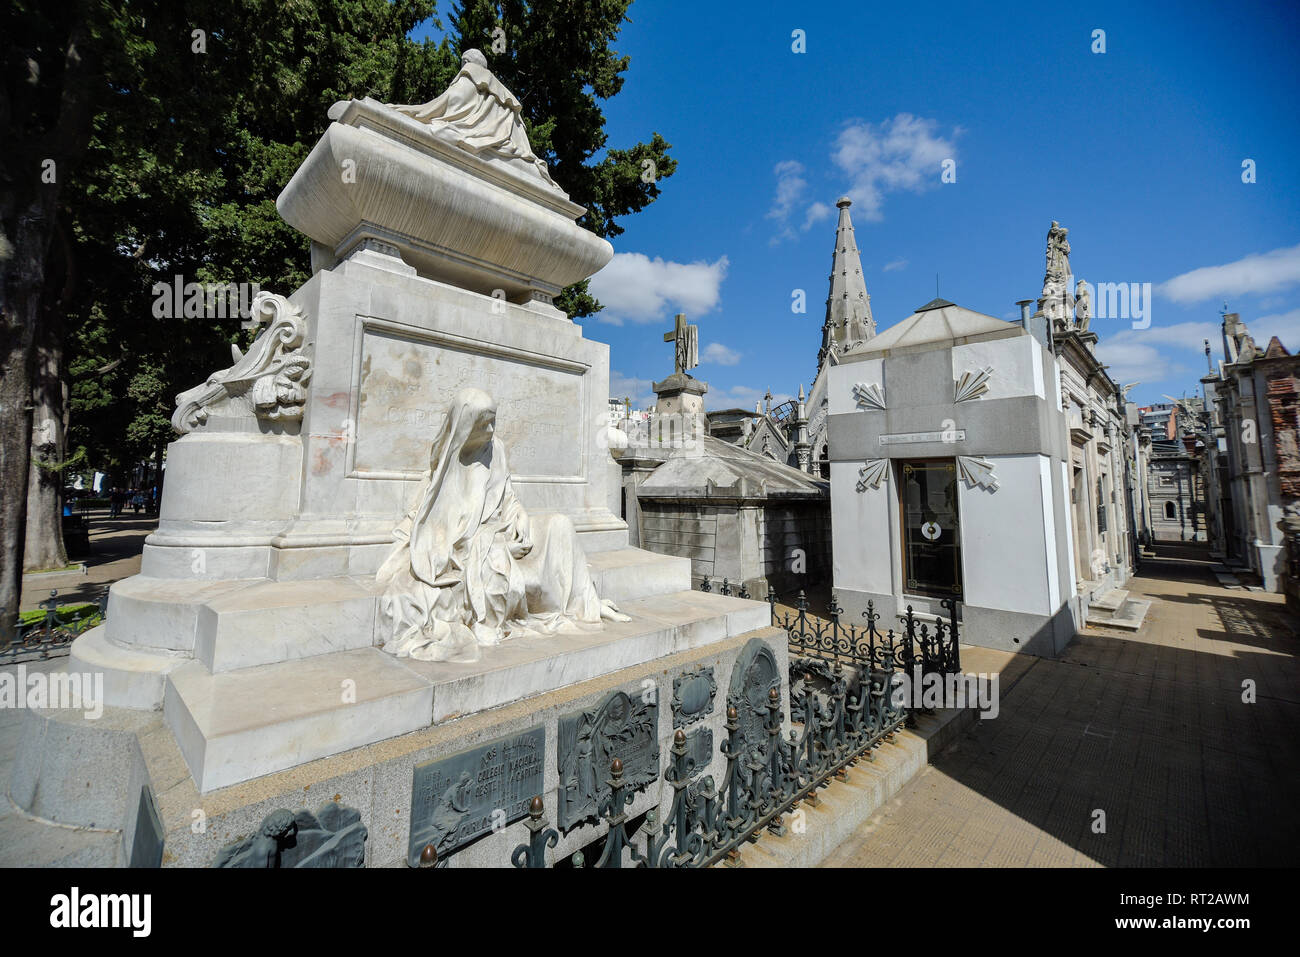 Buenos Aires, Argentina - Sept 23, 2016: View of the tomb of President Carlos Pellegrini at the La Recoleta Cemetery in Capital Federal. Stock Photo